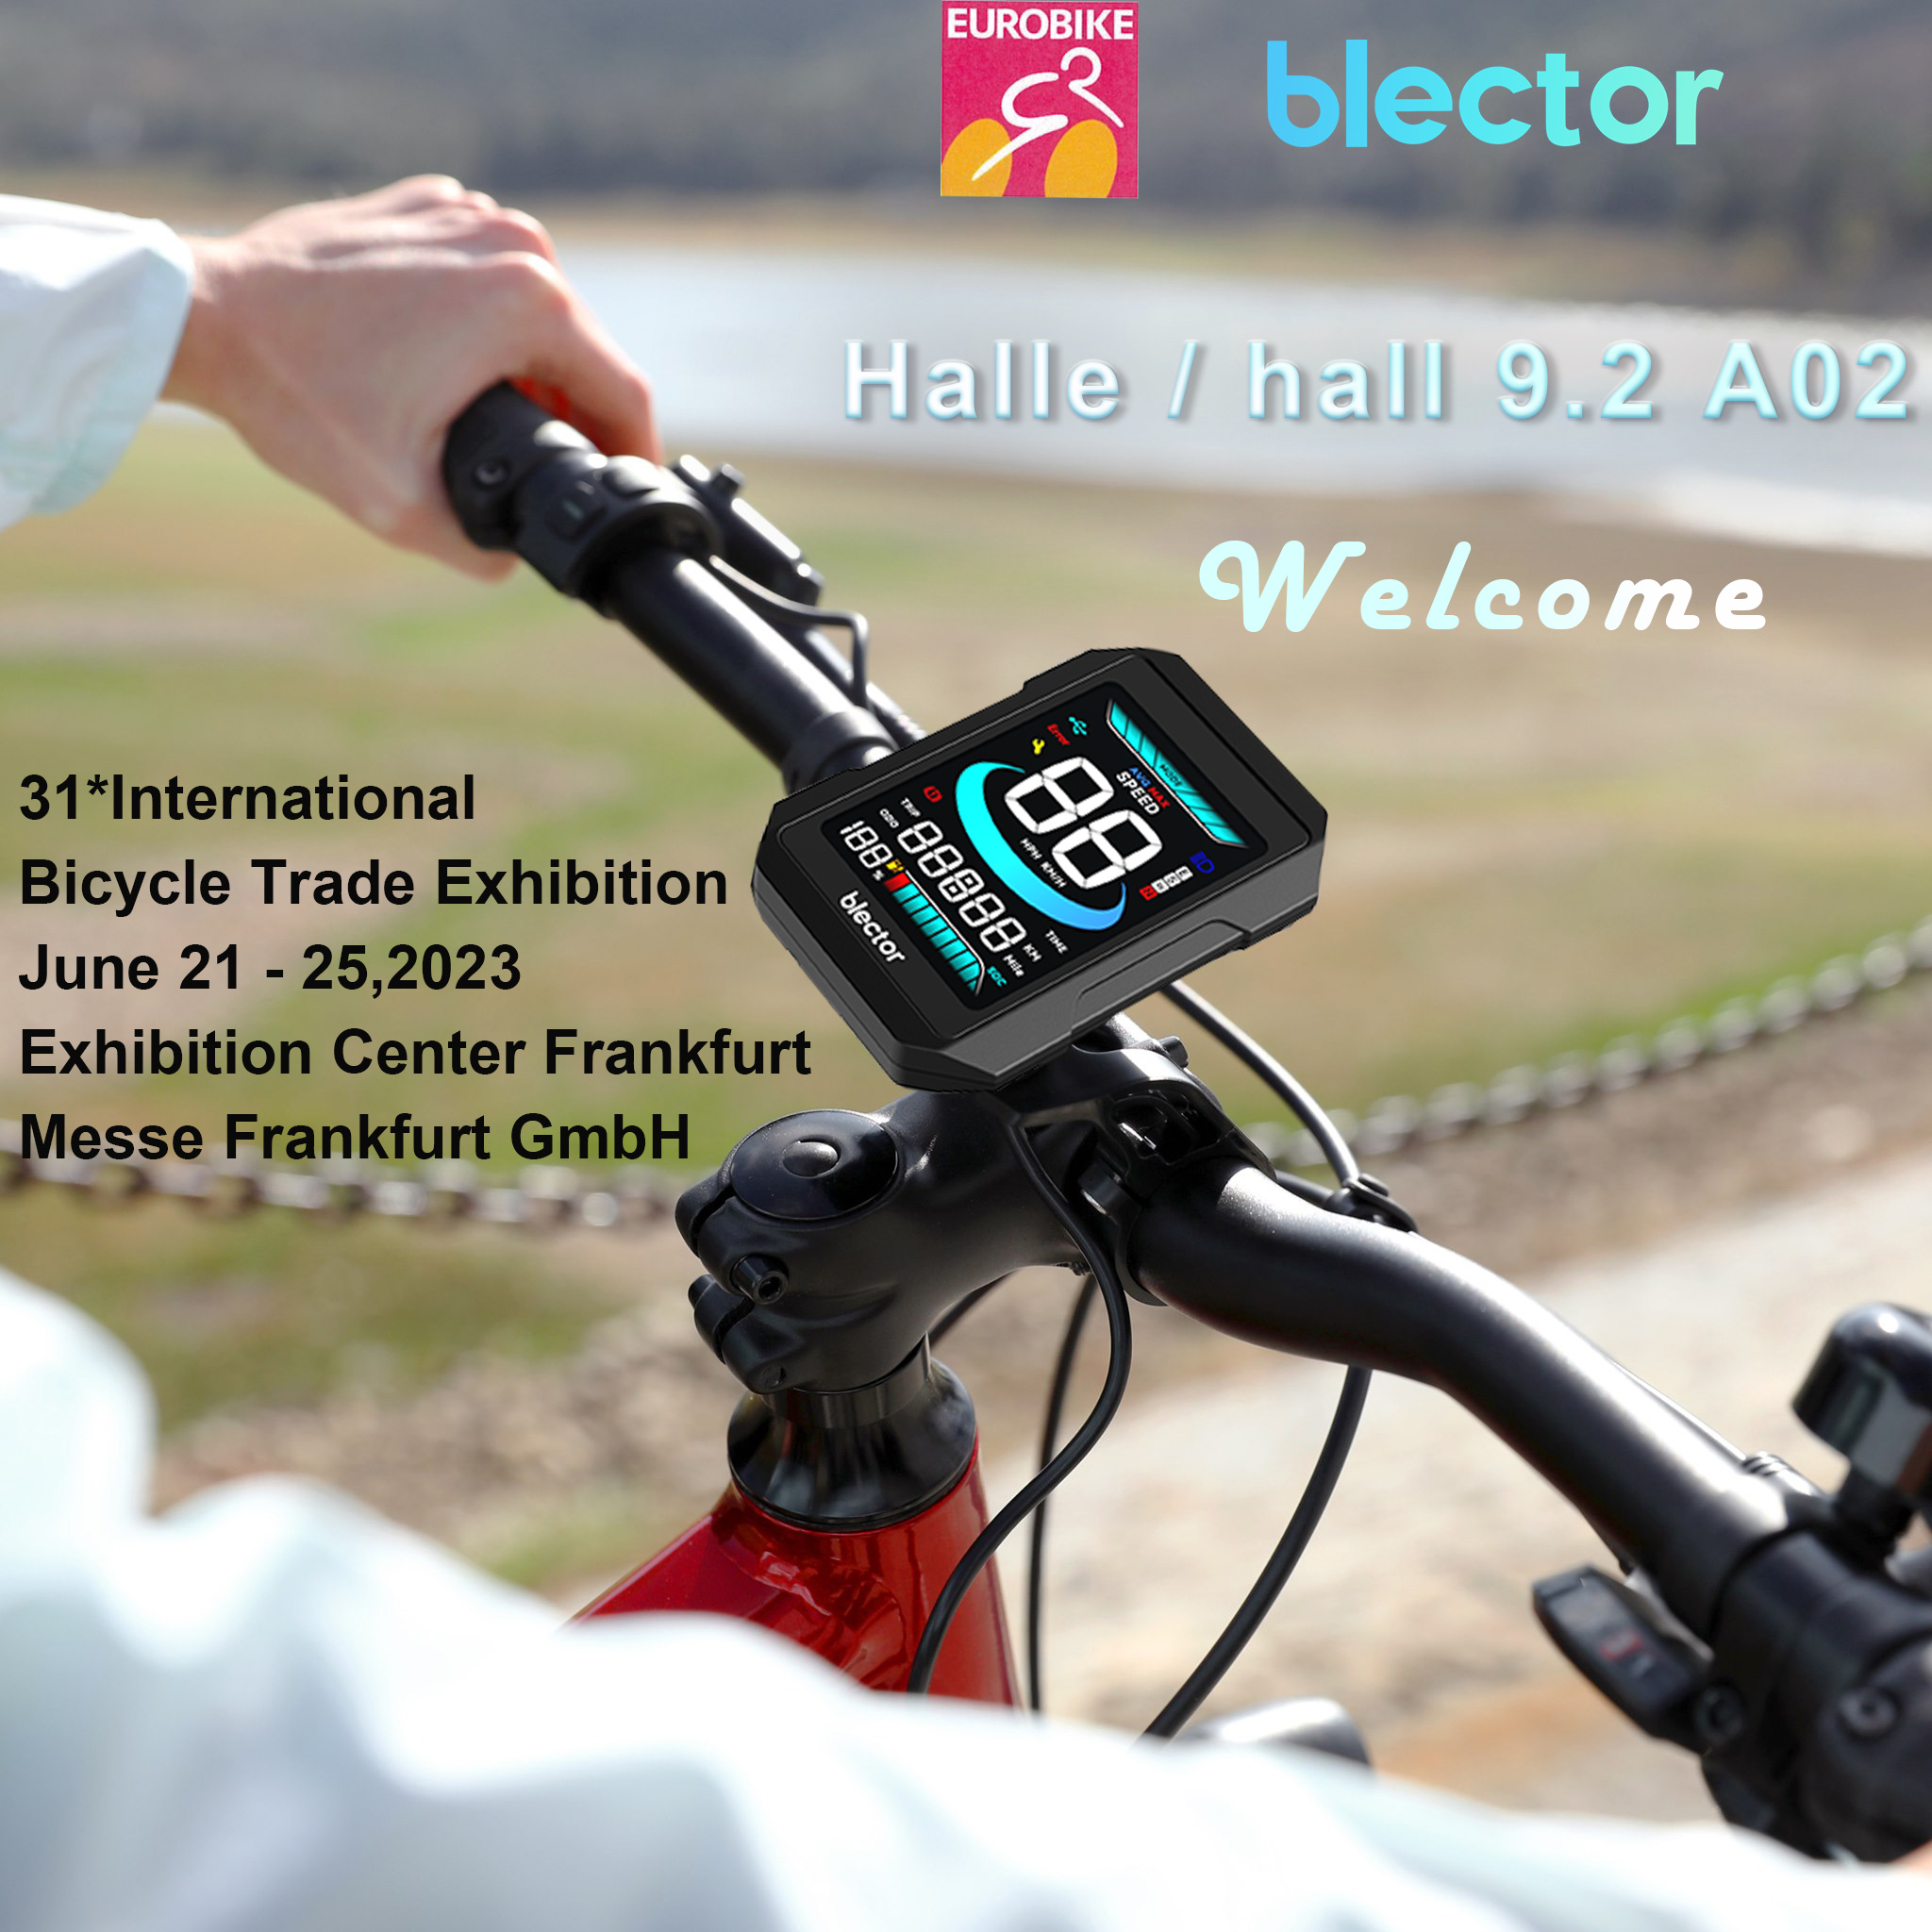 Revolutionize Your Ride with Blector Group at EUROBIKE Exhibition!